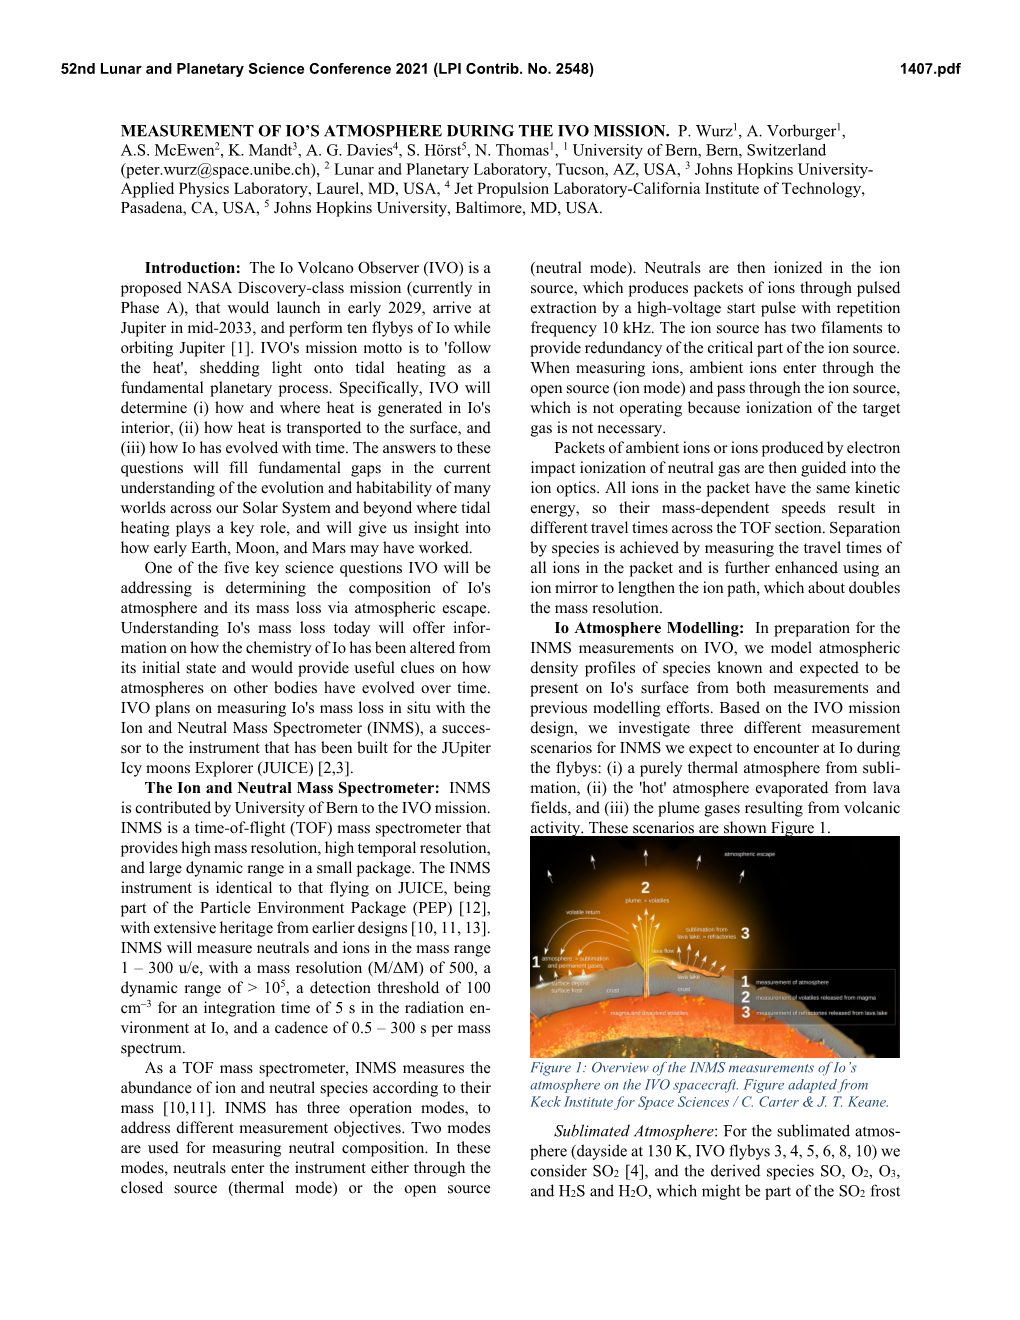 Measurement of Io's Atmosphere During the Ivo